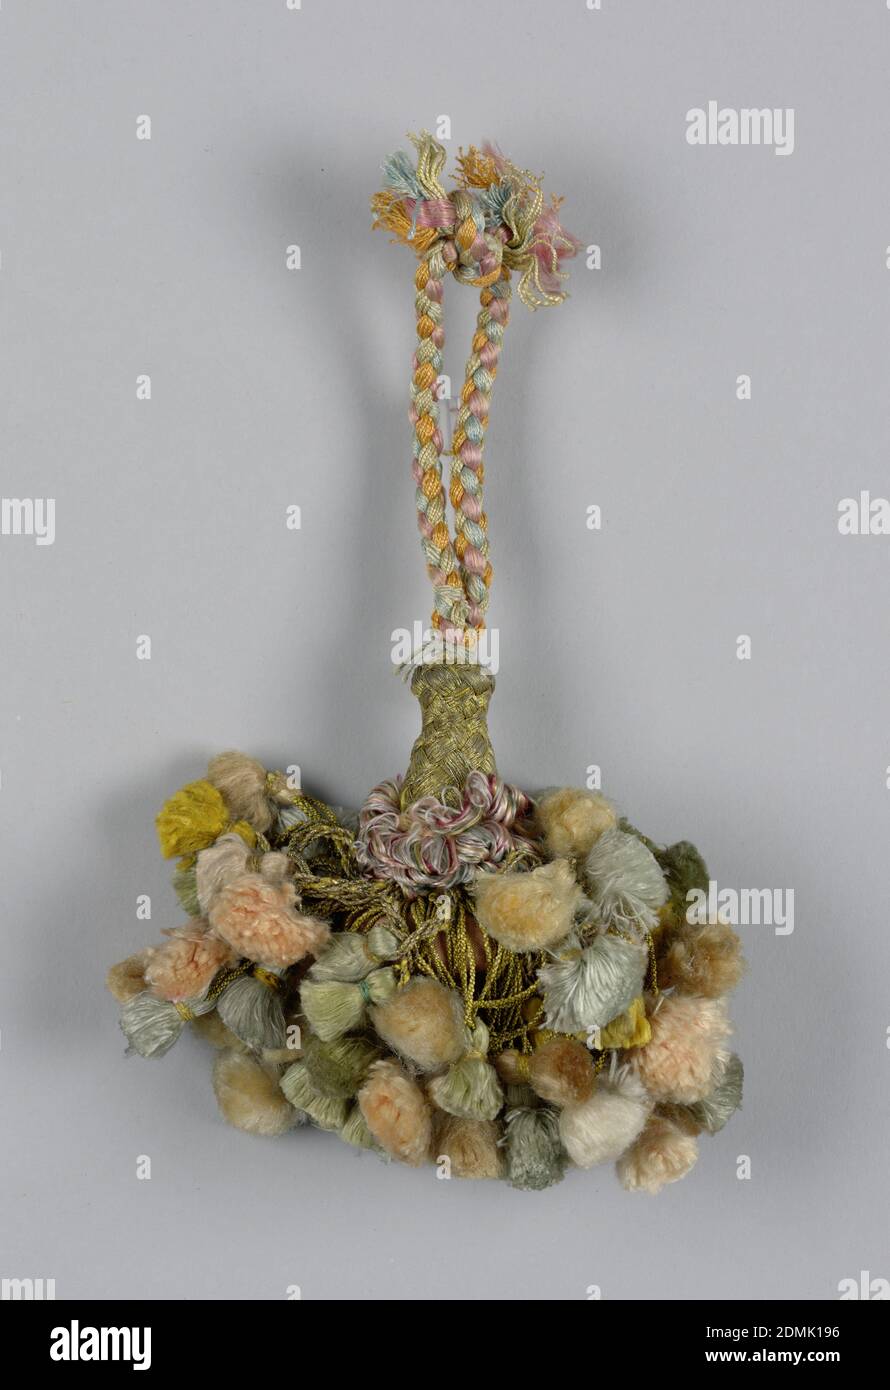 Tassel, Medium: silk, metal threads, wooden core, Skirt of gilt threads, twisted and looped and each supporting a small tassel. Collar of looped and colored silks. Head is vase-shaped and wrapped with gilt threads. Cord of braided pink, blue, yellow, and gold threads., Spain, 18th century, trimmings, Tassel Stock Photo